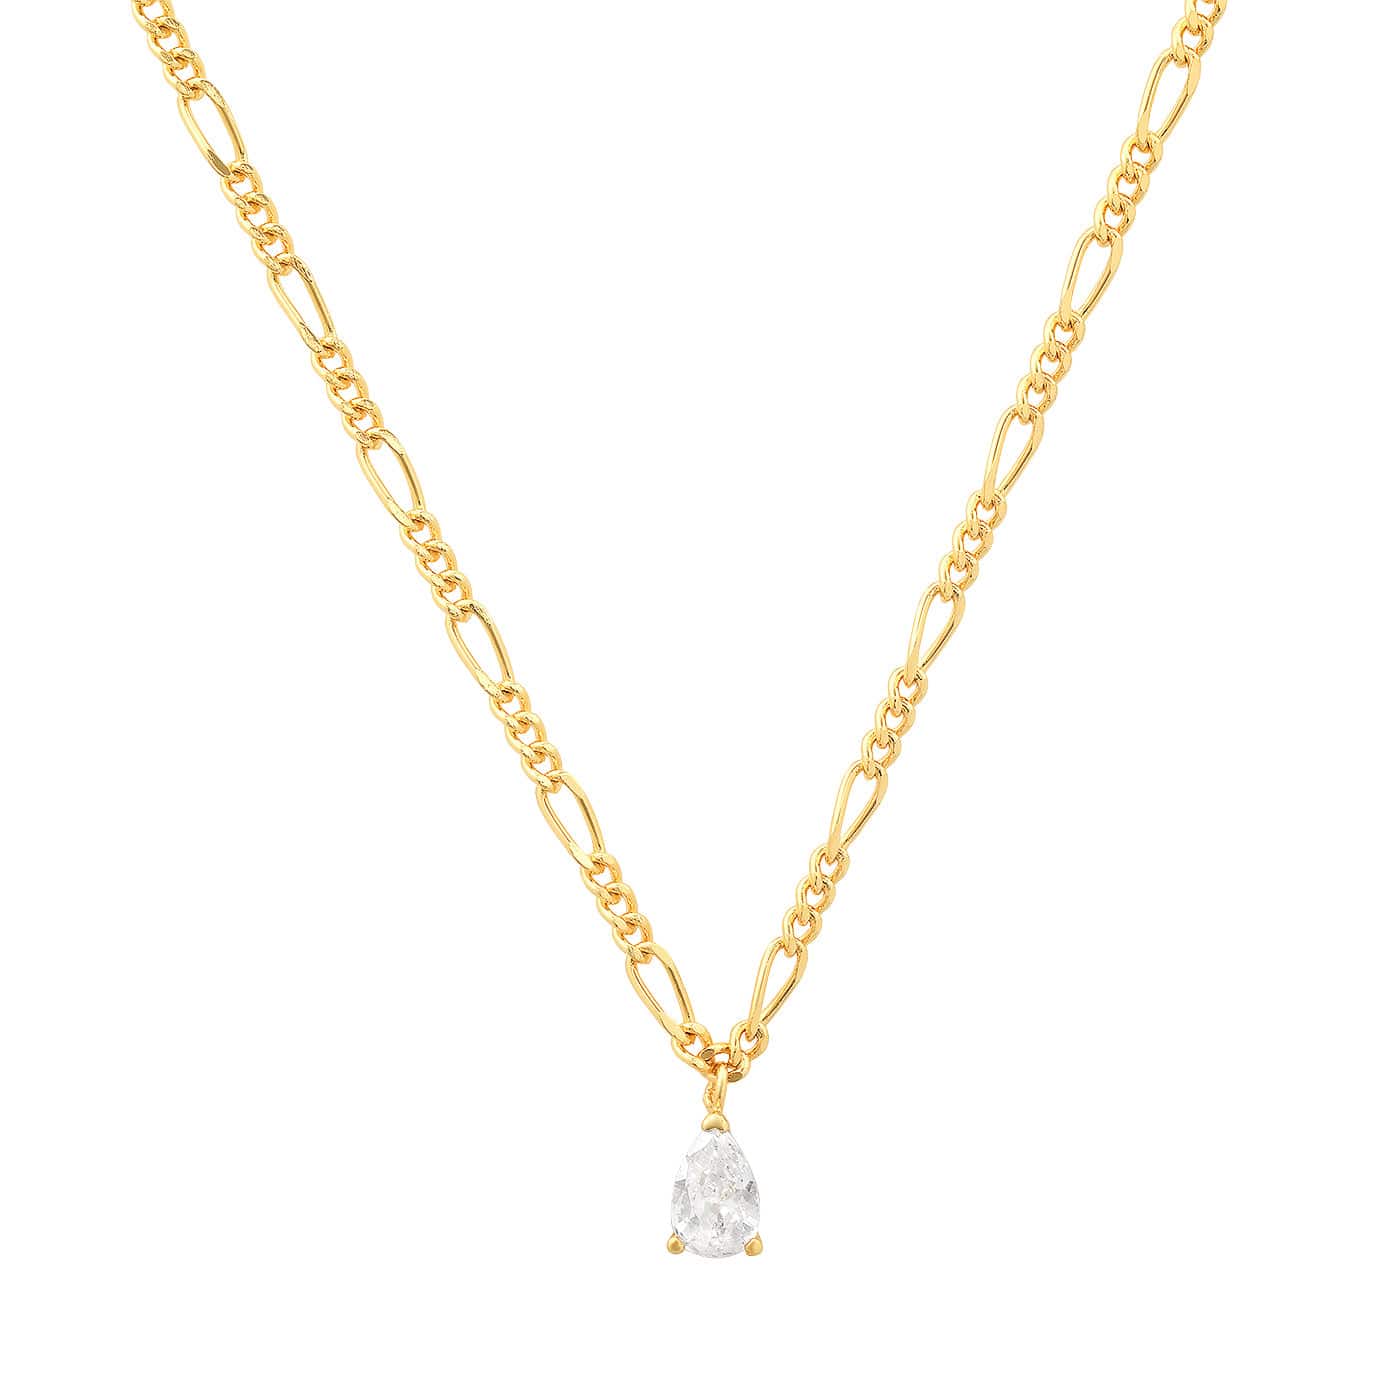 TAI JEWELRY Necklace Gold Figaro Chain with Pear Shape CZ Pendant